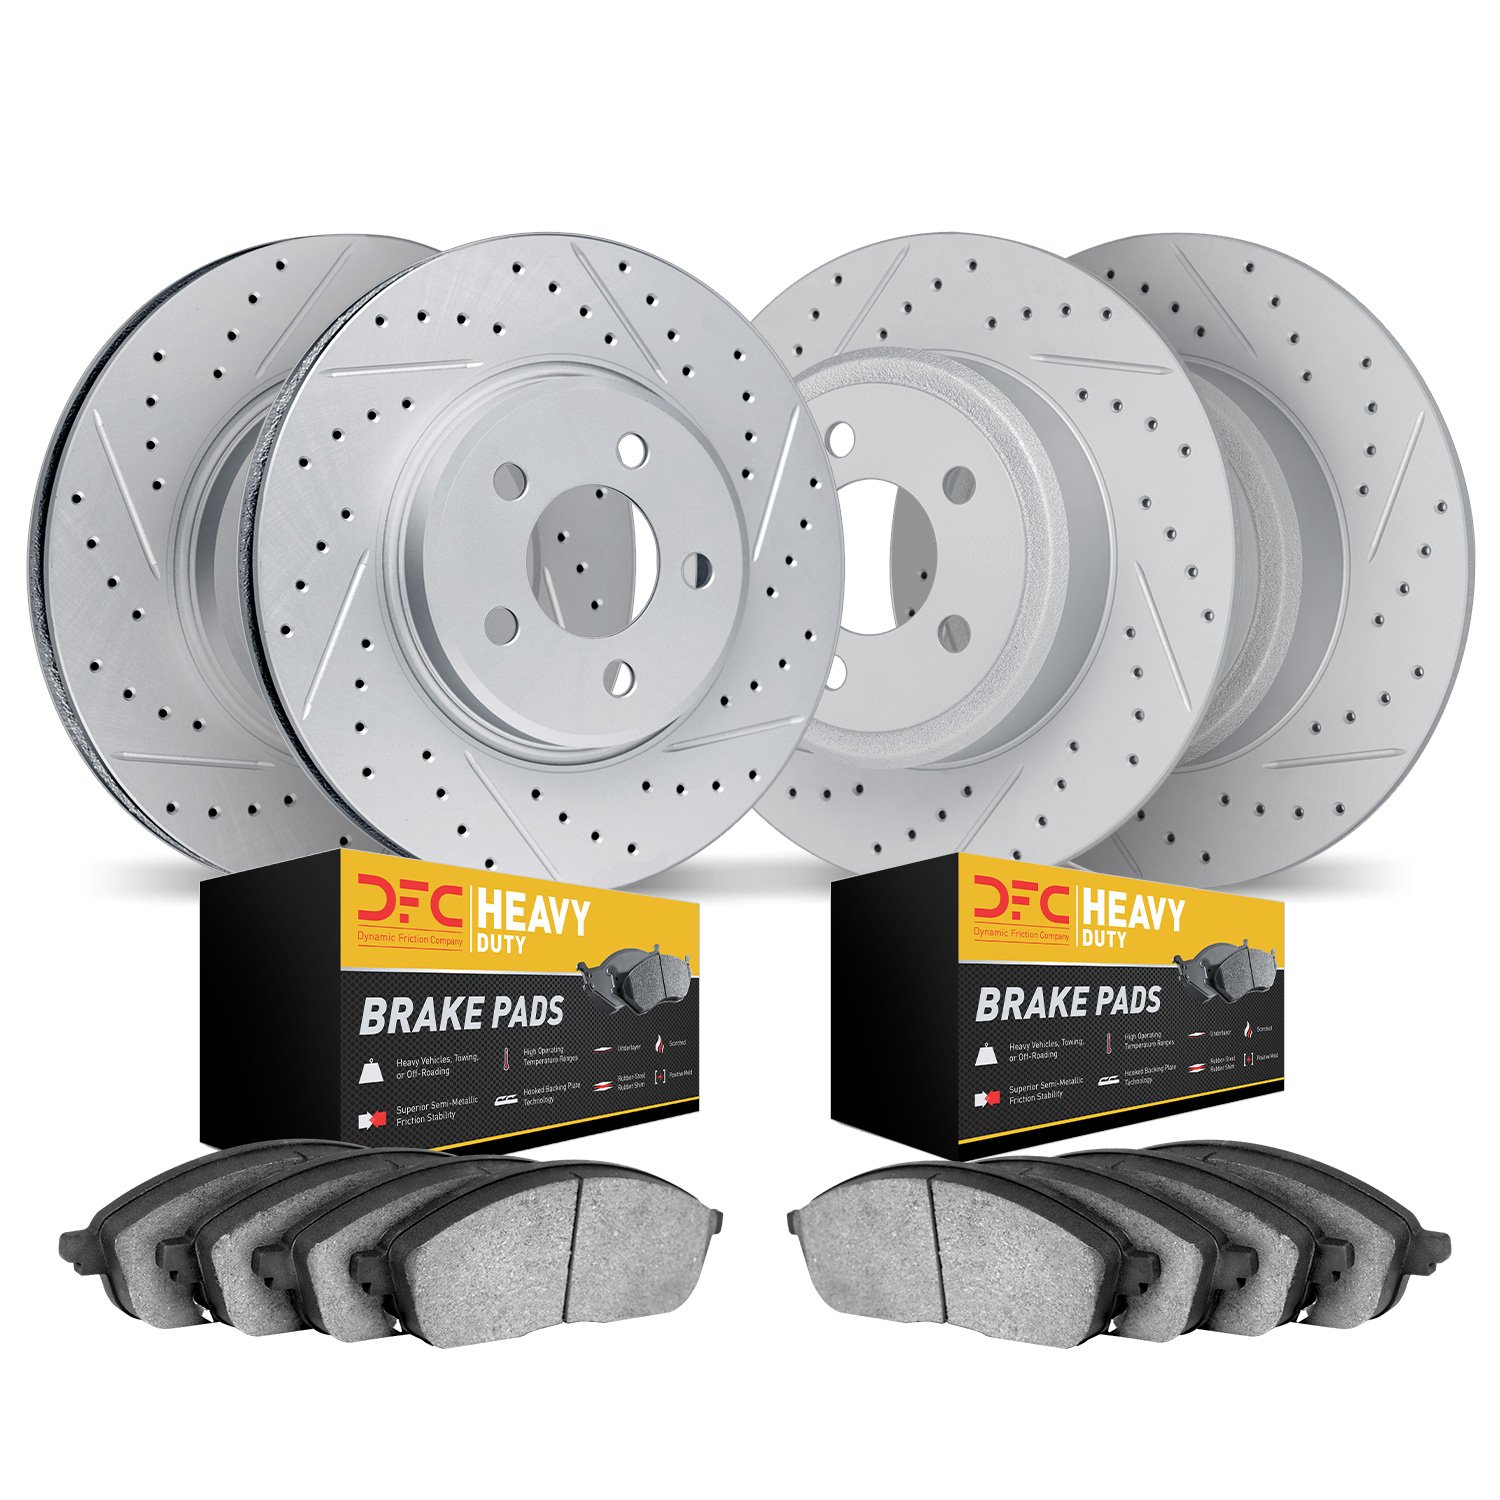 2204-54001 Geoperformance Drilled/Slotted Rotors w/Heavy-Duty Pads Kit, 2006-2010 Ford/Lincoln/Mercury/Mazda, Position: Front an